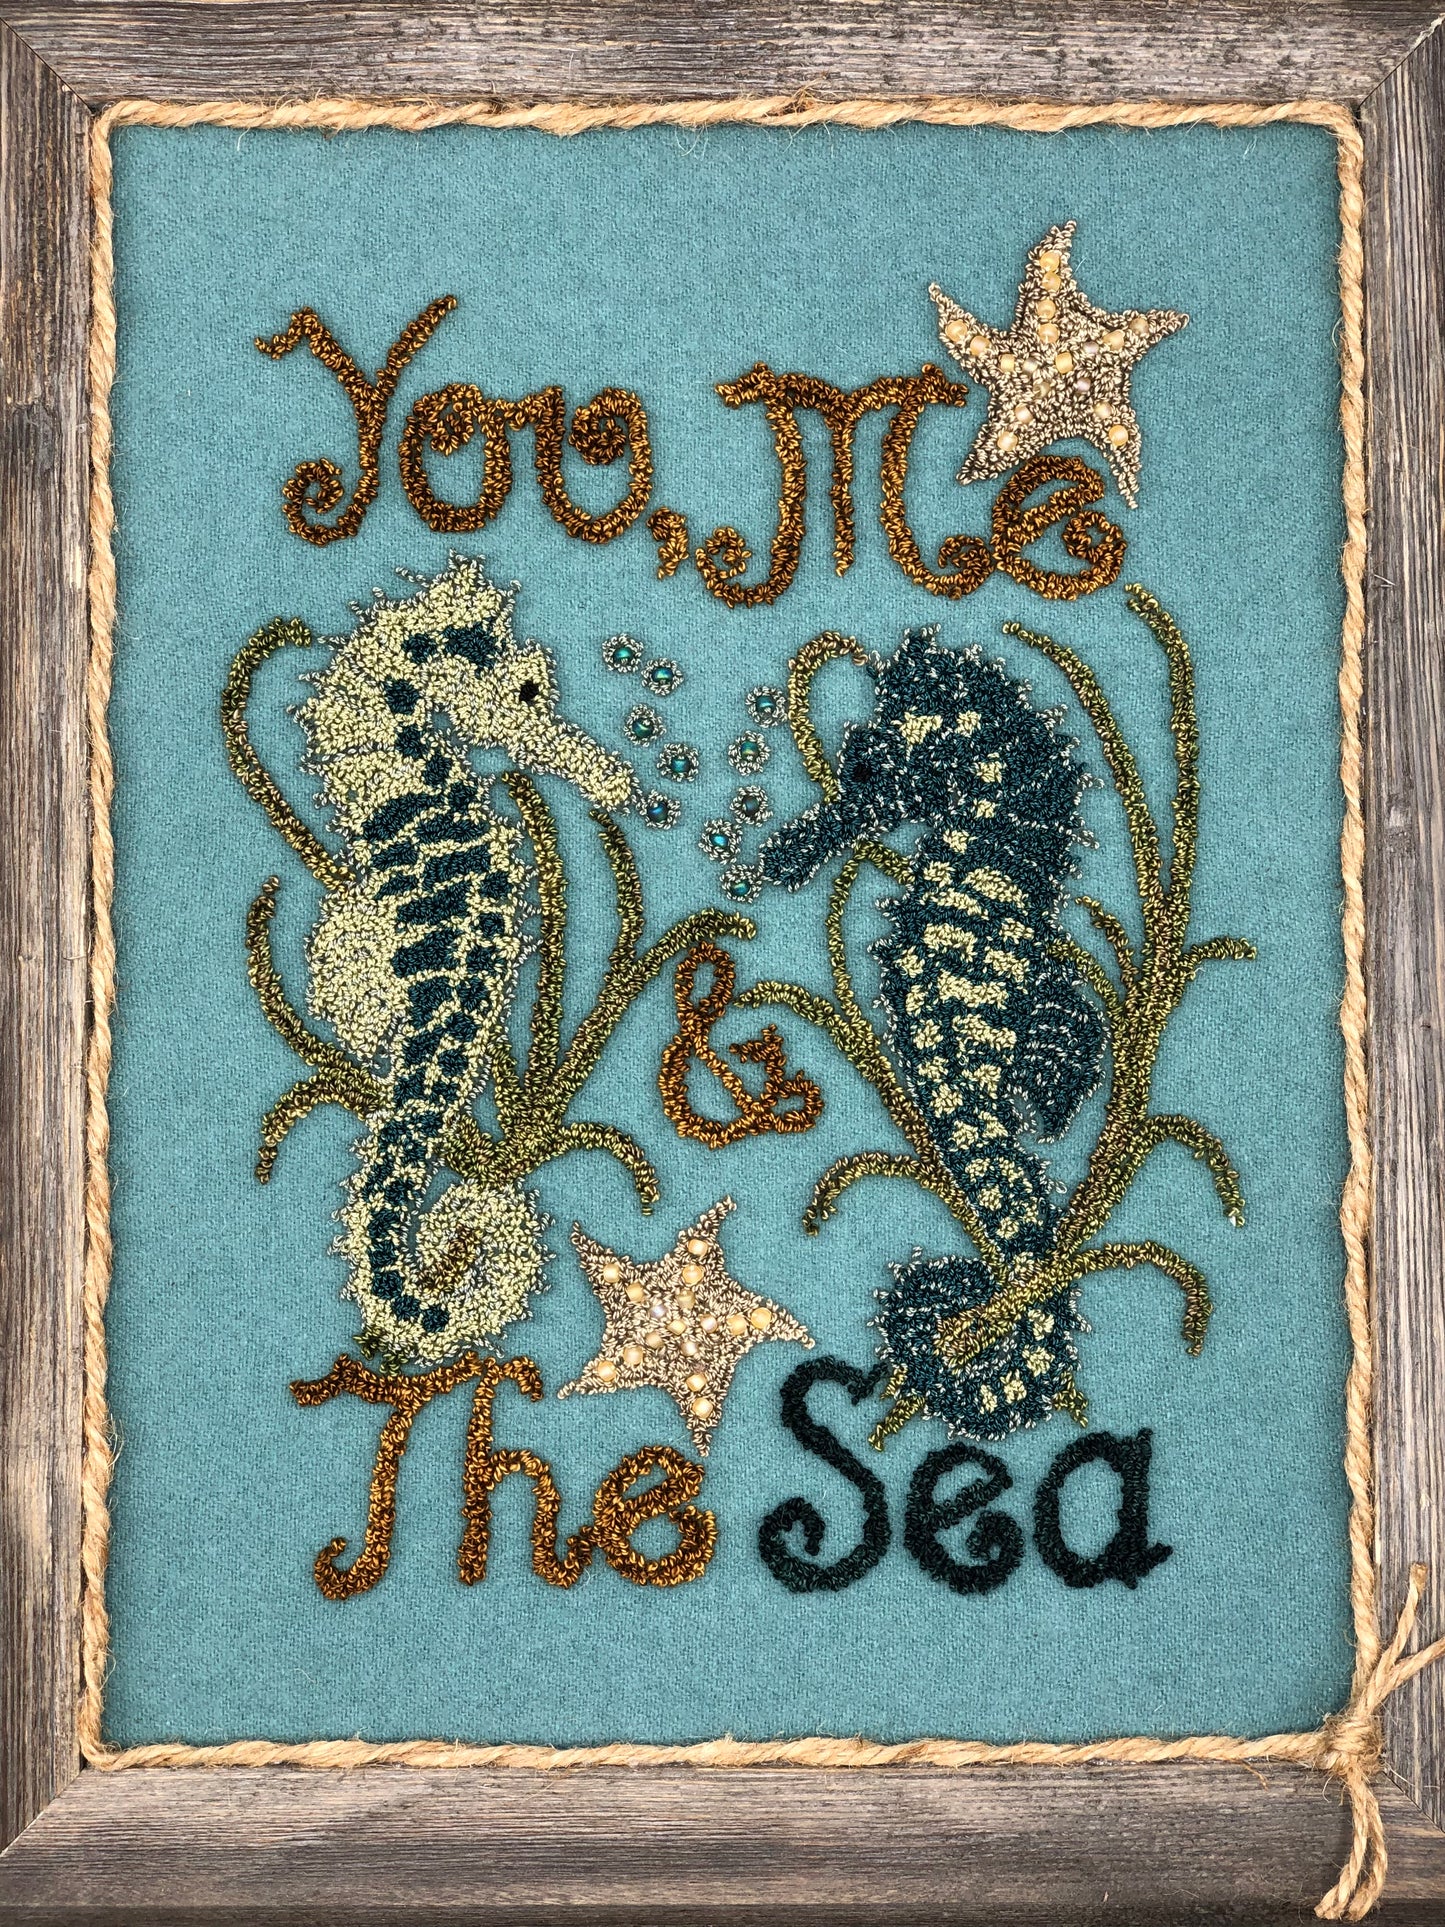 You, Me & The Sea -Punch Needle Pattern by Orphaned Wool. This wonderful undersea pattern is available as a Paper Pattern or a Pattern on Weaver's Cloth fabric. This design shown used wool fabric as the background but you can use thread to also create the background.